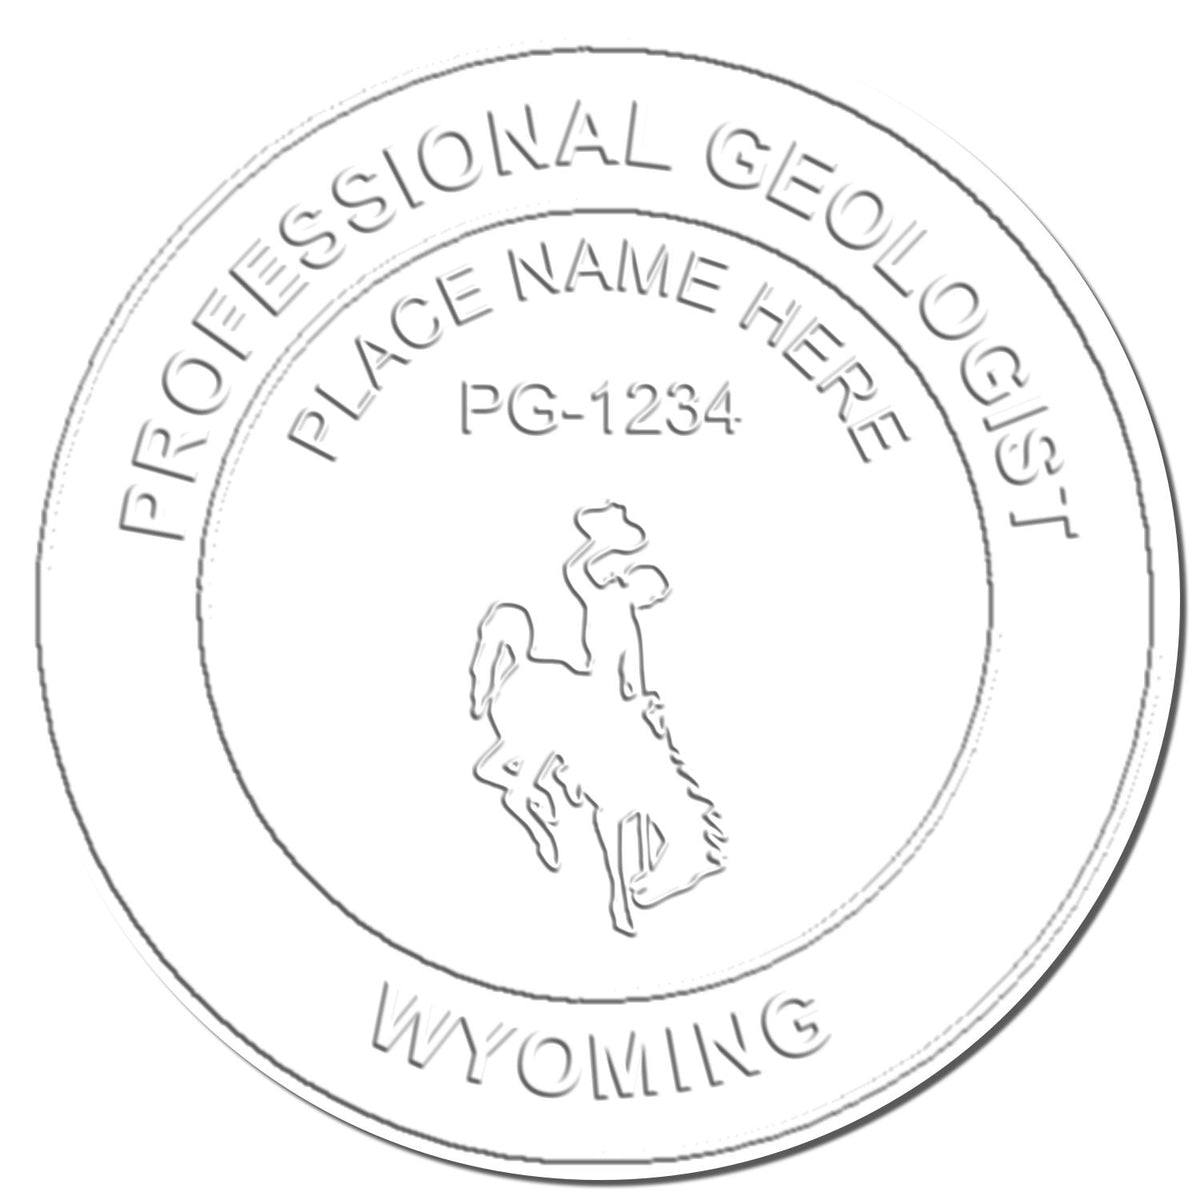 This paper is stamped with a sample imprint of the Handheld Wyoming Professional Geologist Embosser, signifying its quality and reliability.